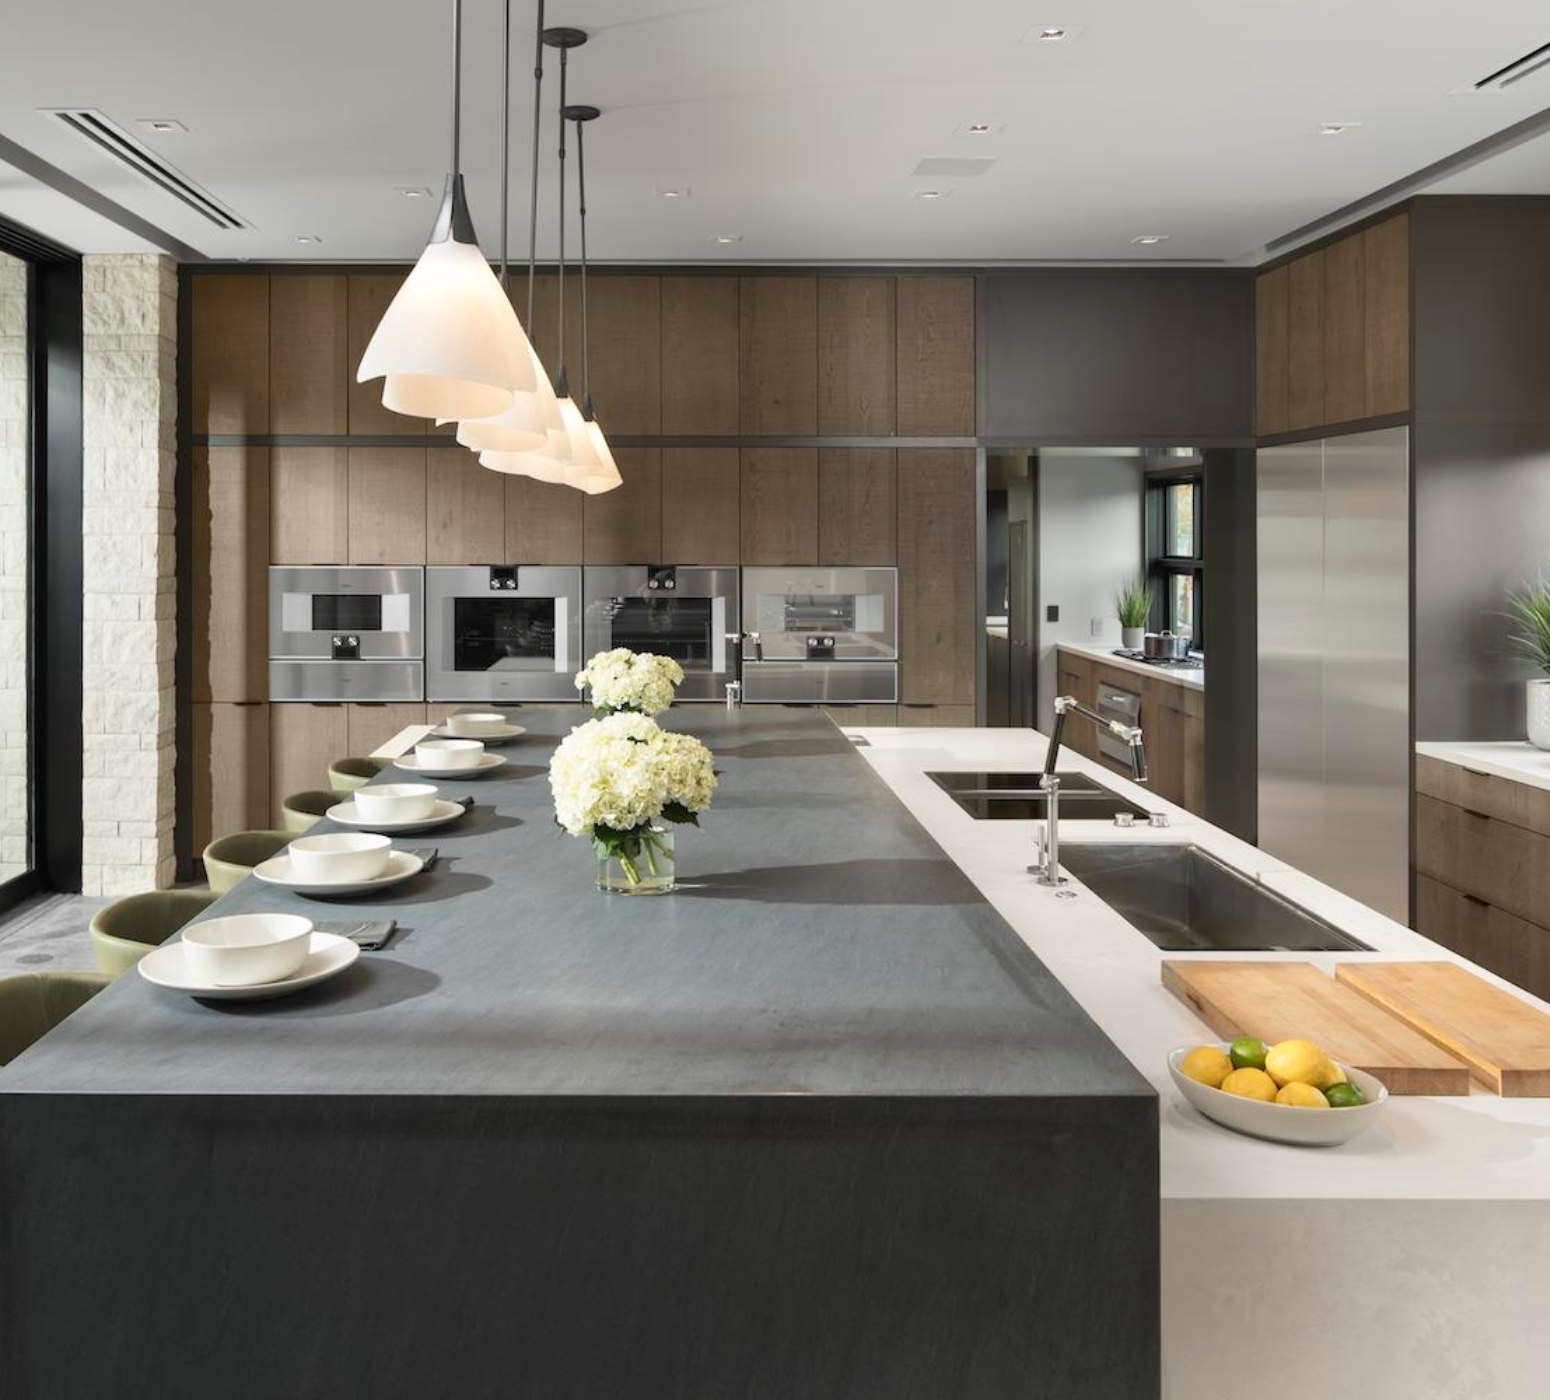 2019 The New American Home Kitchen by the National Association of Home Builders in Las Vegas